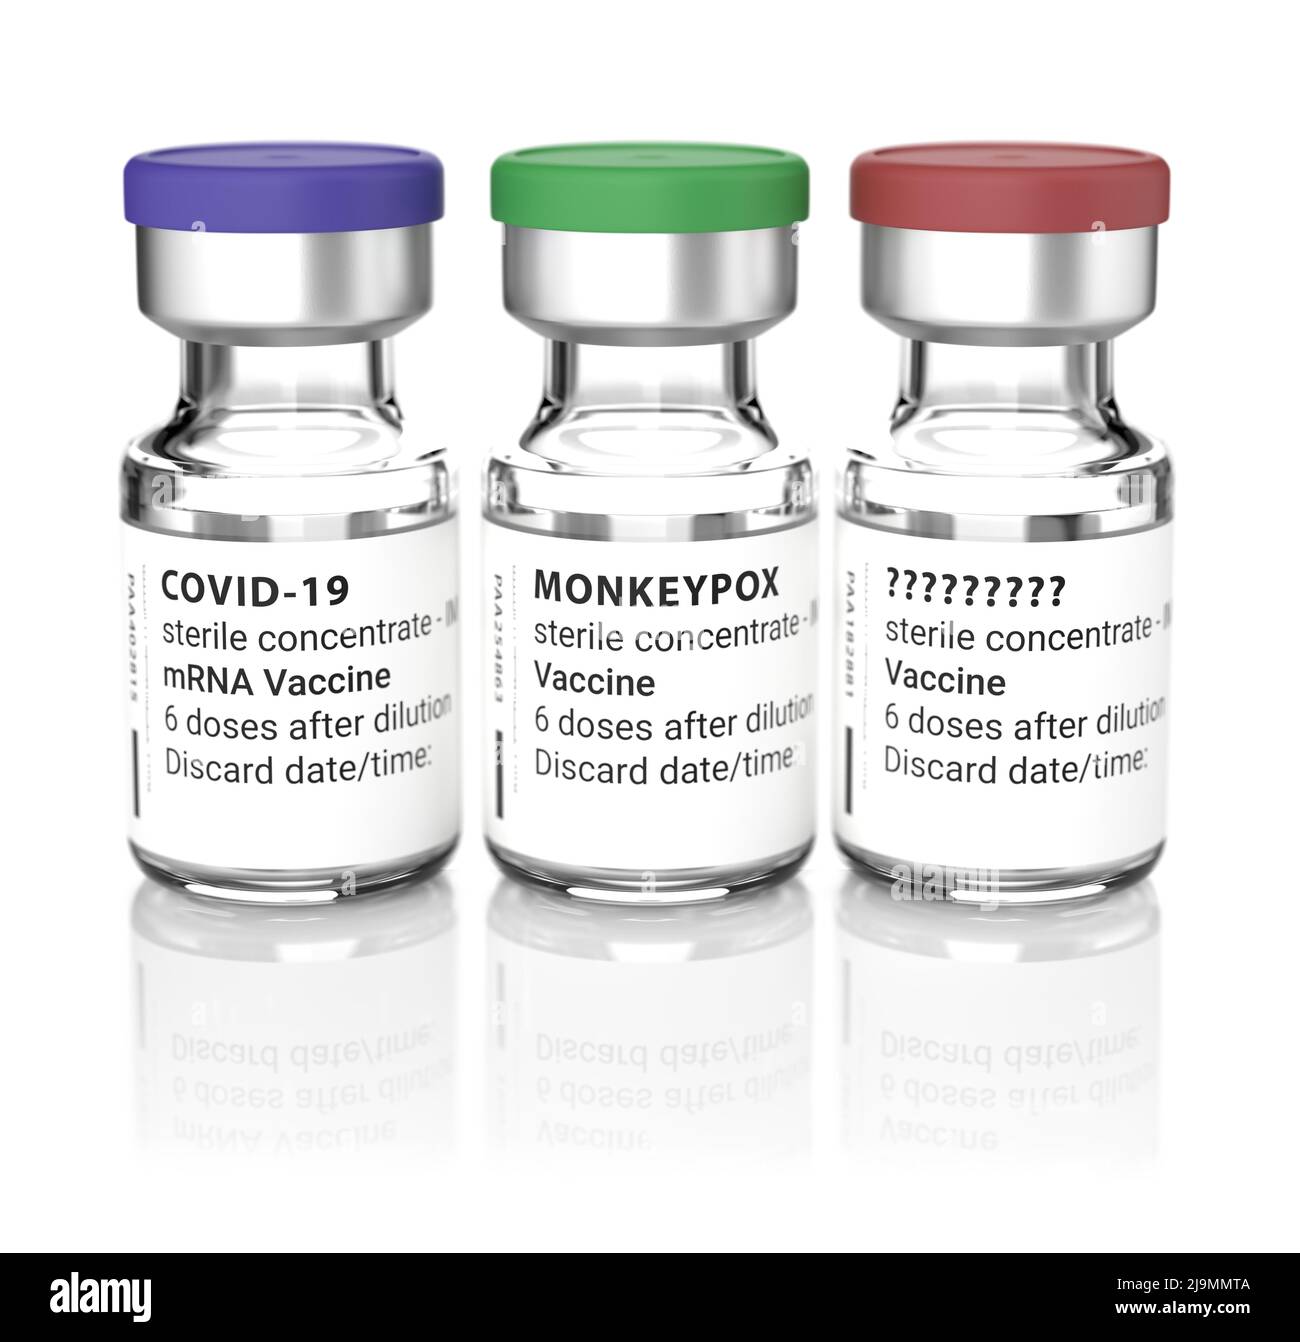 Concept Shot: What is the next disease after Covid-19 and Monkeypox? Three vials with vaccination against 'Covid-19', 'Monkeypox', and '????' Stock Photo